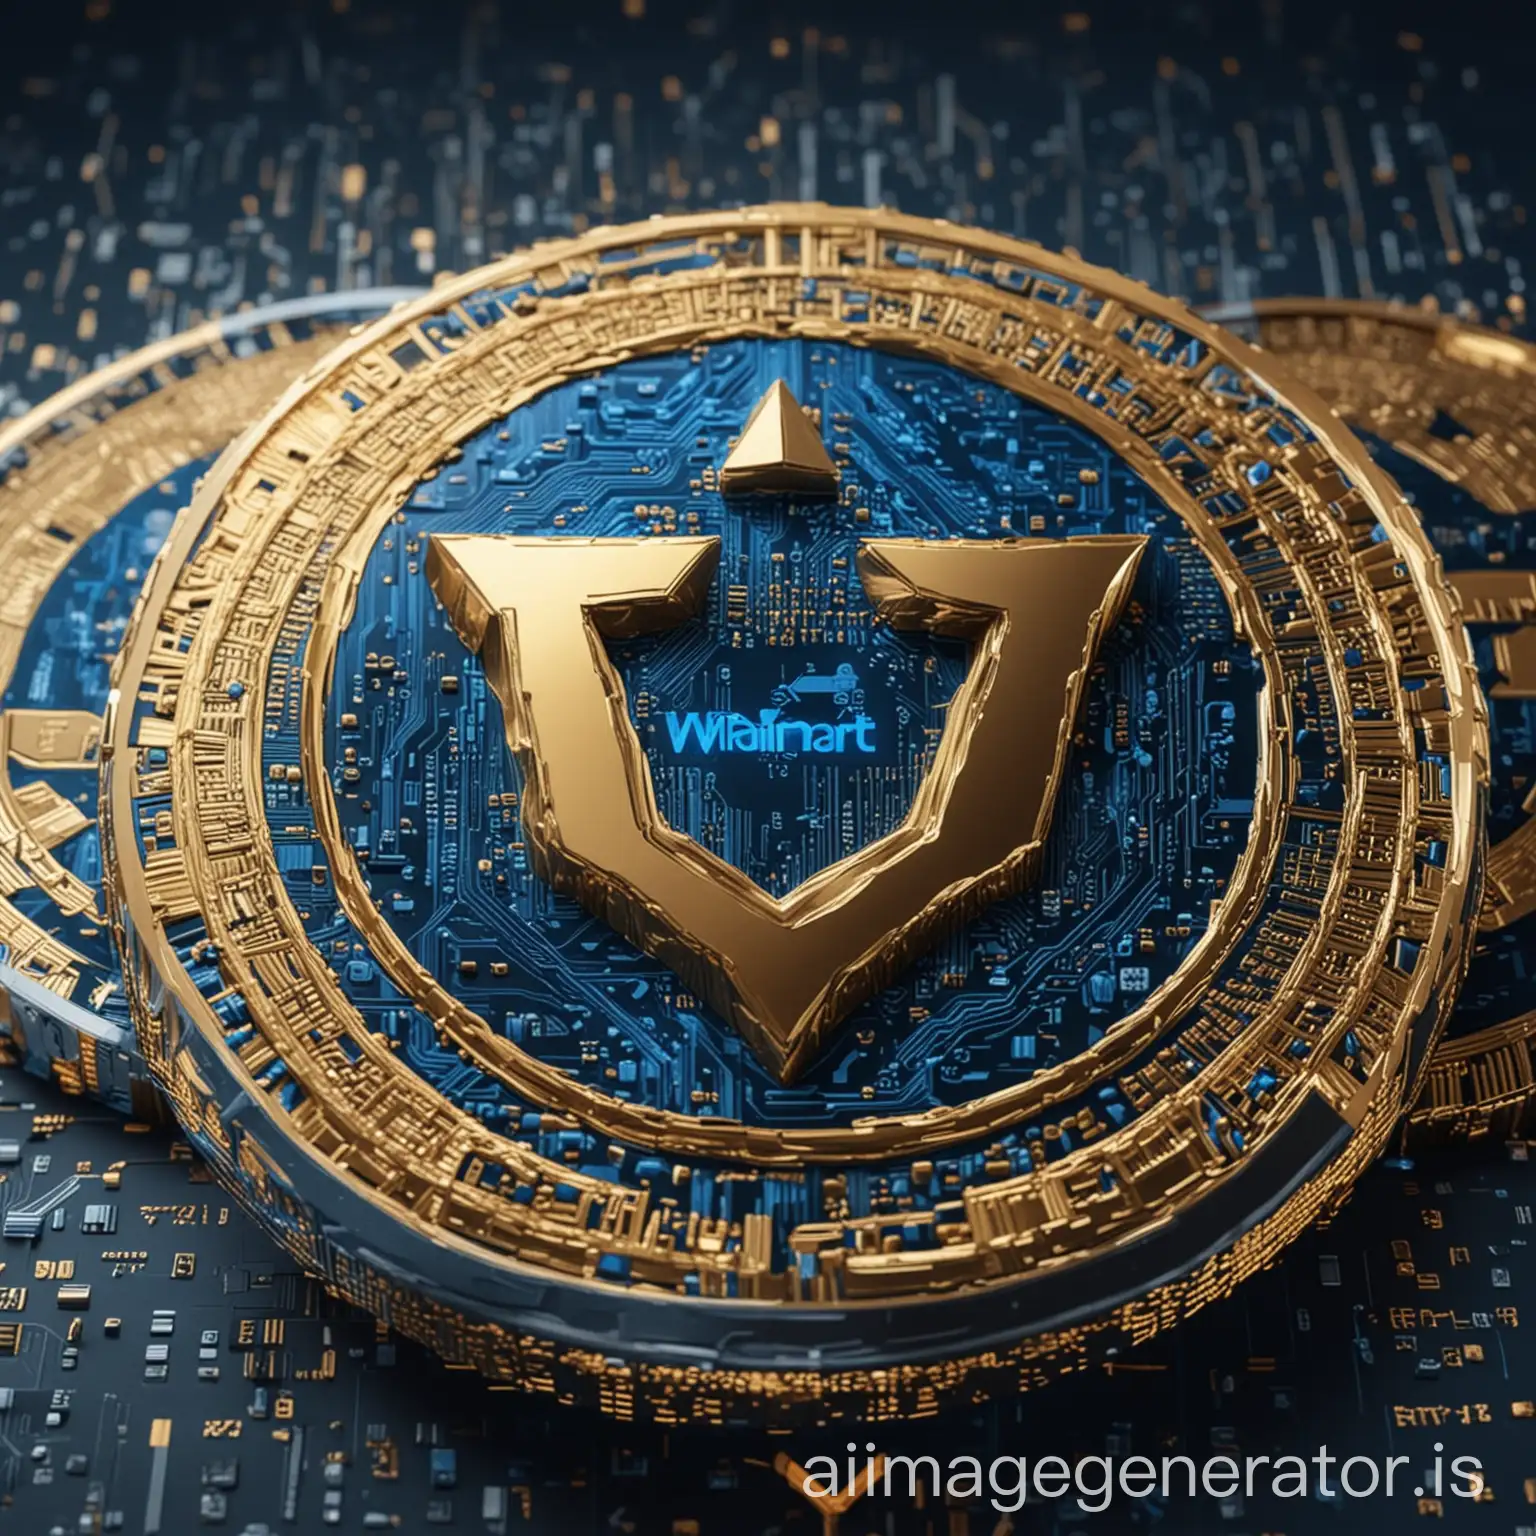 Futuristic detailed blue and gold Walmart crypto currency